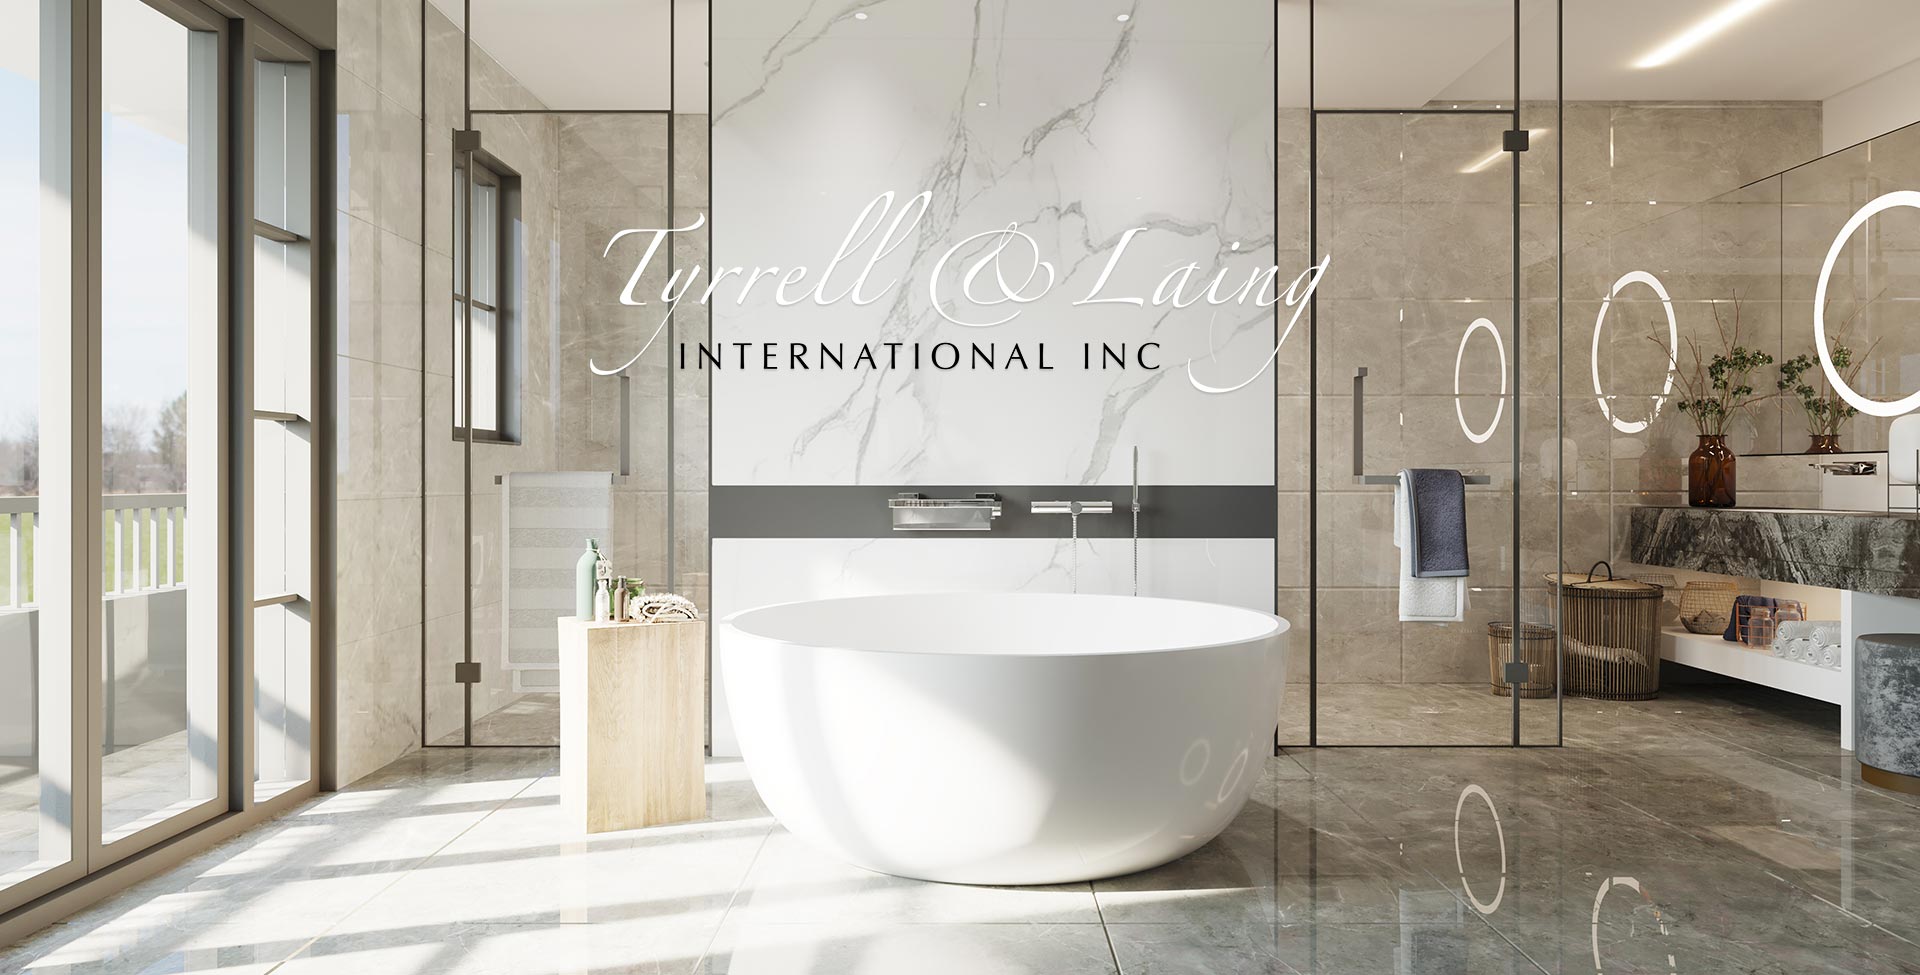 Contemporary freestanding tubs from Tyrrell & Laing